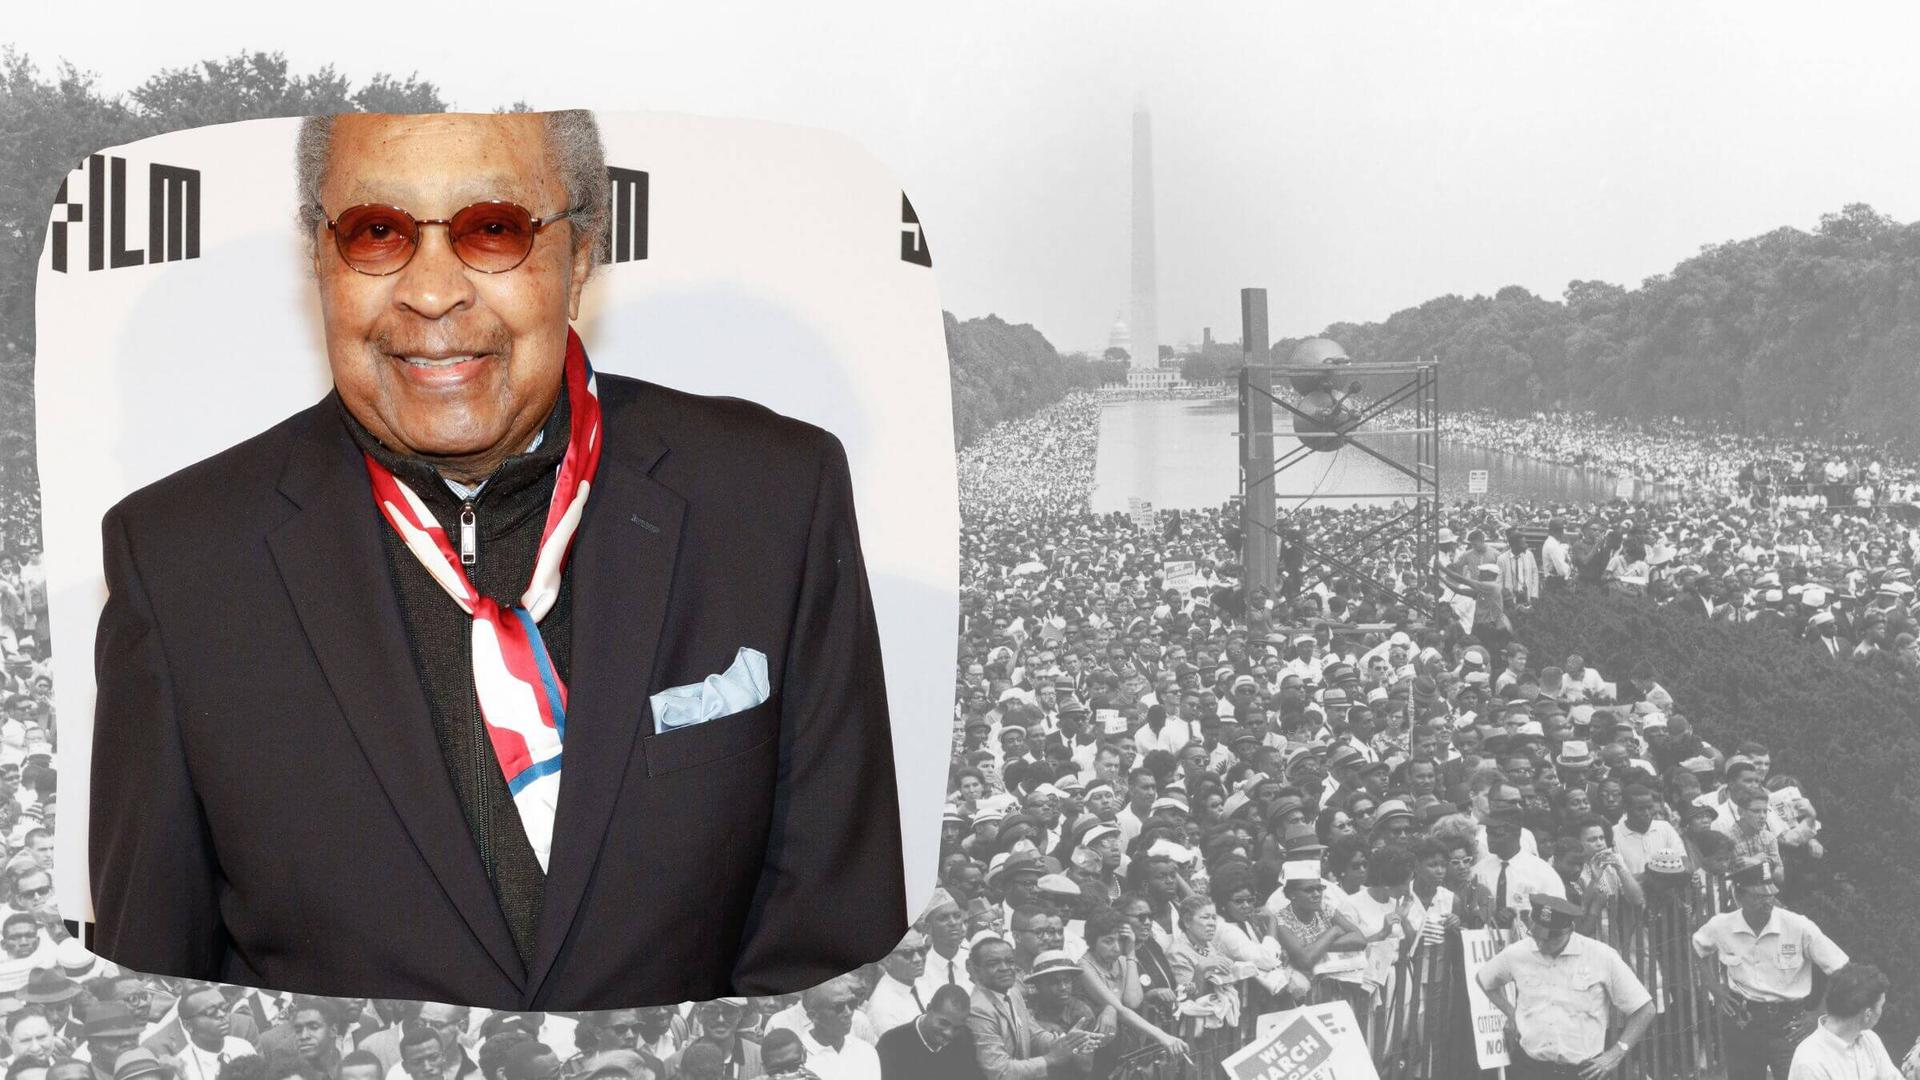 Clarence Jones helped Martin Luther King Jr. as a legal counsel on segregationists’ libel suits — and bailed King out of a Birmingham jail. (Photo-illustration by Nora Berman; Kimberly White/Getty Images)